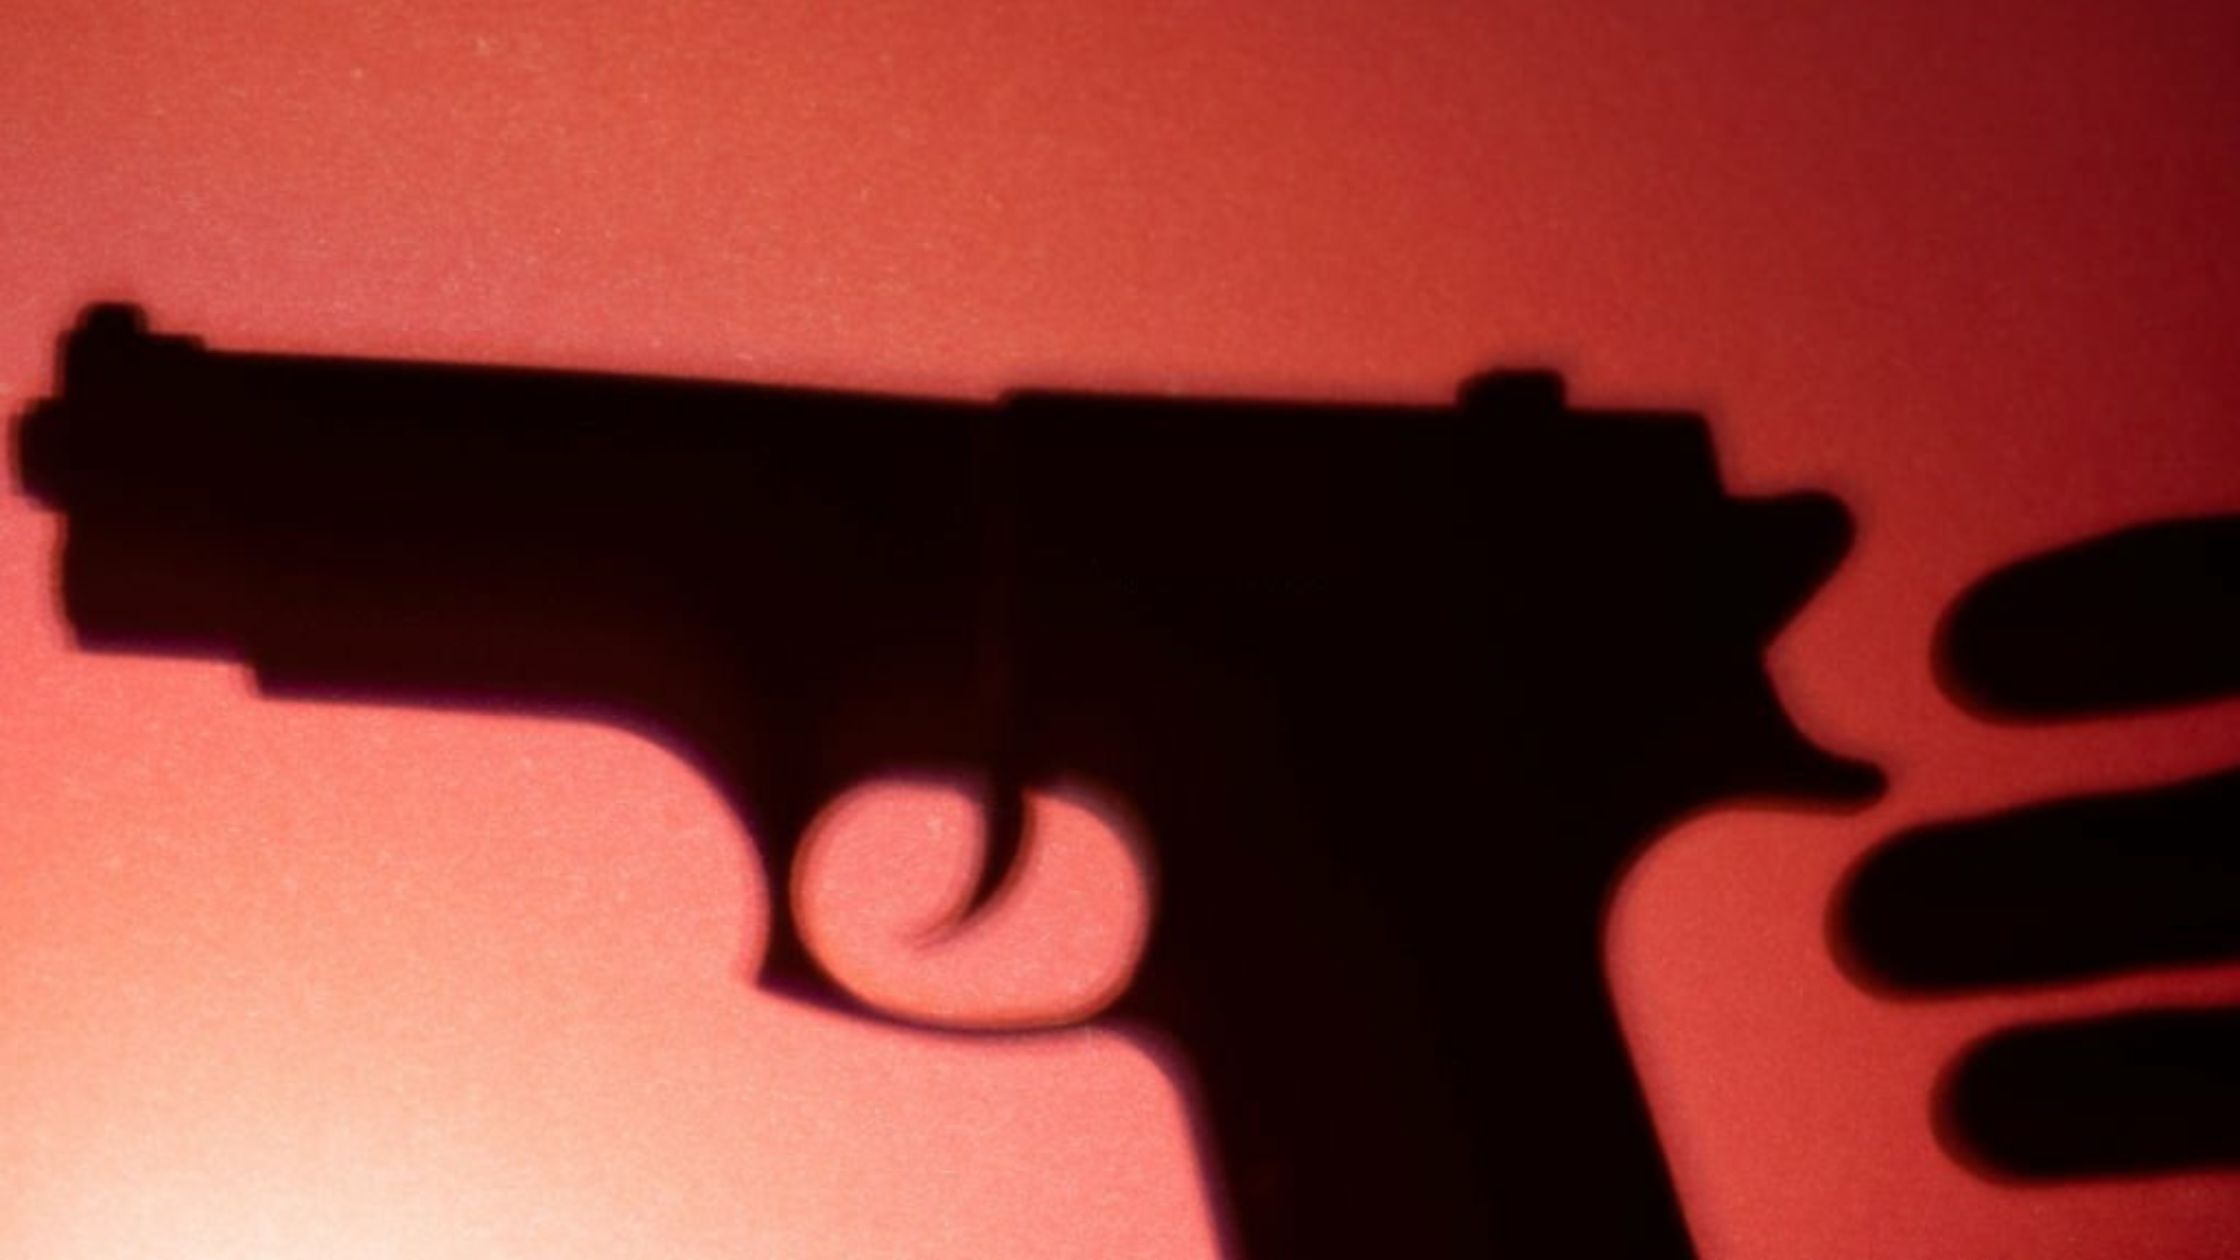 A Life Lost, a Future Shattered: Man Shoots Himself While Playing with a Gun